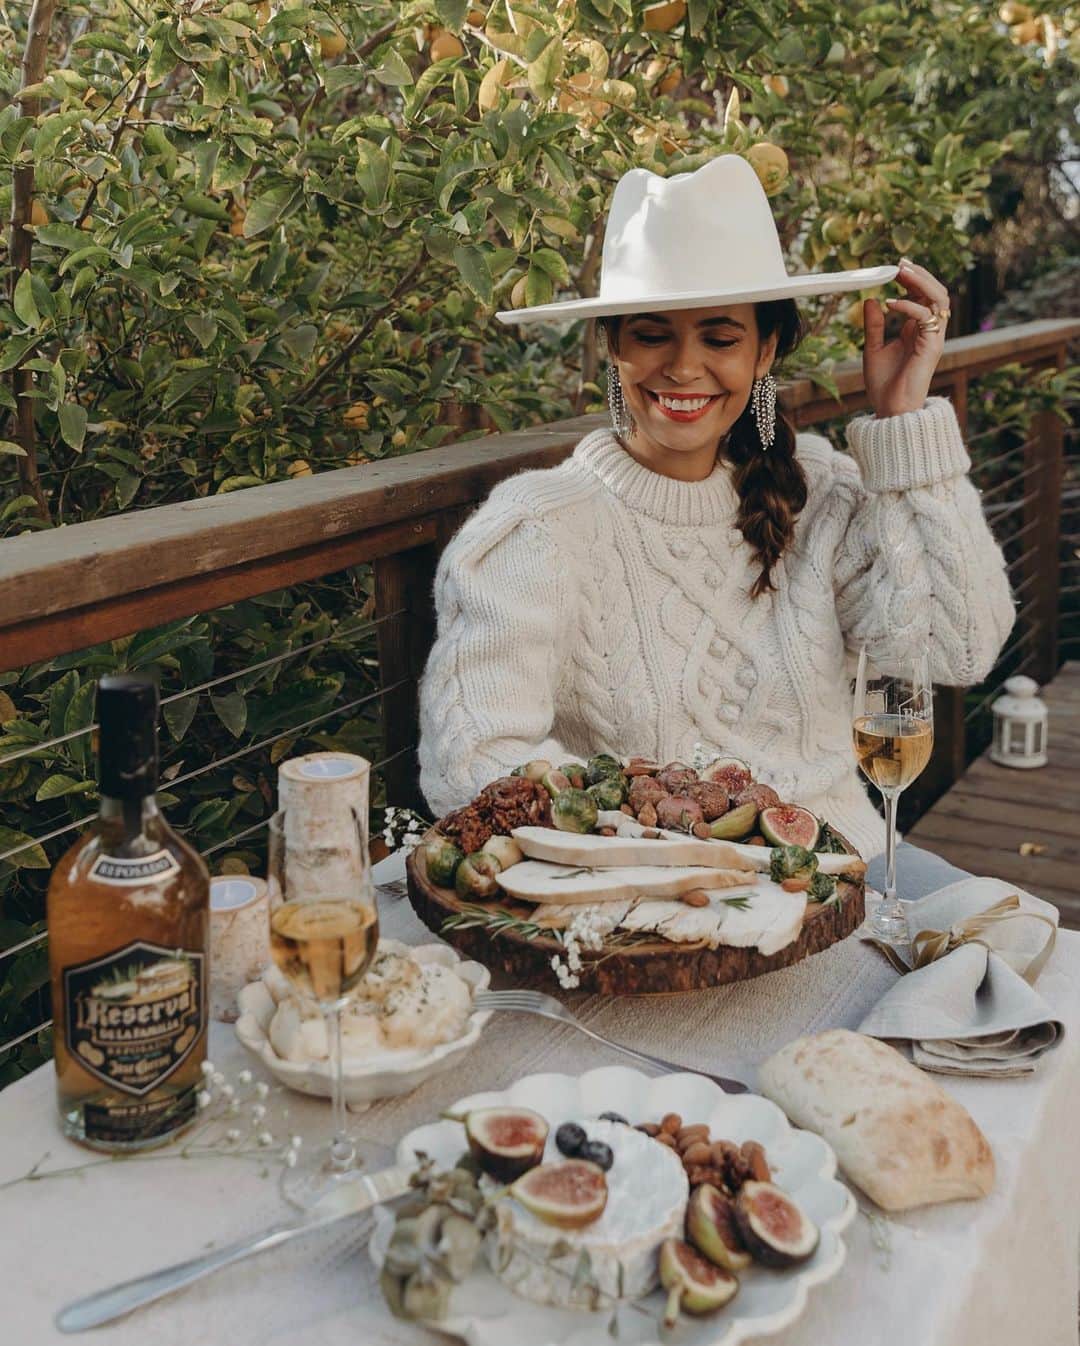 Collage Vintageのインスタグラム：「#sponsoredbycuervo Nothing makes me feel happier on Holidays than sharing special moments around a cute table, full of rich snacks, the perfect tequila and infinite conversations with my boyfriend. #ReservaDeLaFamilia was the tequila once reserved for the Cuervo family & friends so it’s the best to share with the ones we love most. What’s your favorite holiday plan? @josecuervotequila #21+」